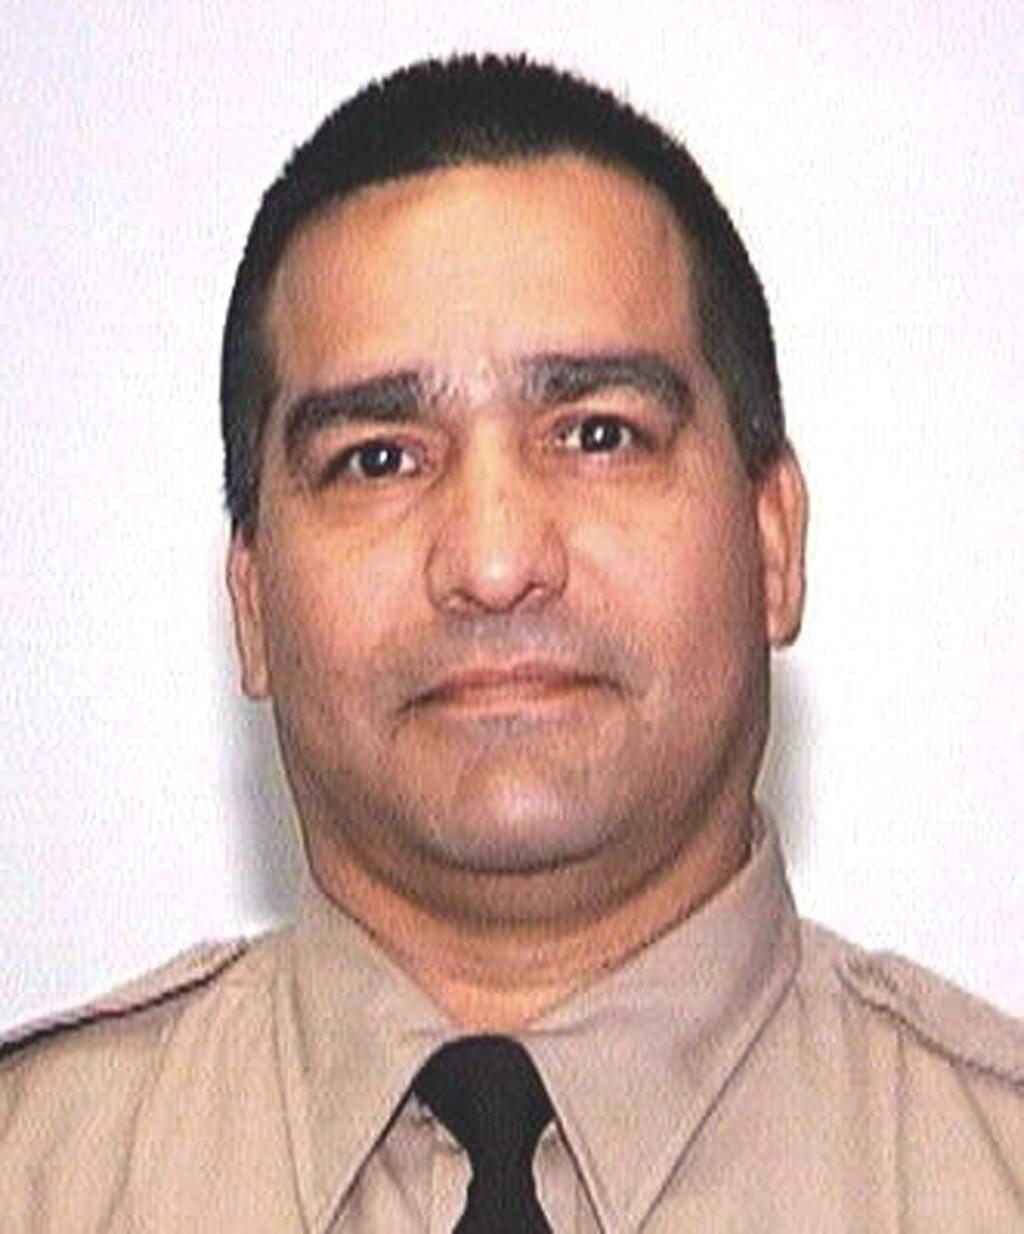 This undated photo provided by the California Department of Corrections and Rehabilitation shows corrections officer Armando Gallegos. Authorities said Gallegos, 56, died five months after he and another officer were attacked by a dozen inmates April 21, 2018 at Kern Valley State Prison in Delano, Calif. The CDCR said Gallegos died at a hospital Sept. 14, 2018. The guards' union believes his death is related to injuries from the assault, but the official cause is pending a coroner's report. (California Department of Corrections and Rehabilitation via AP)